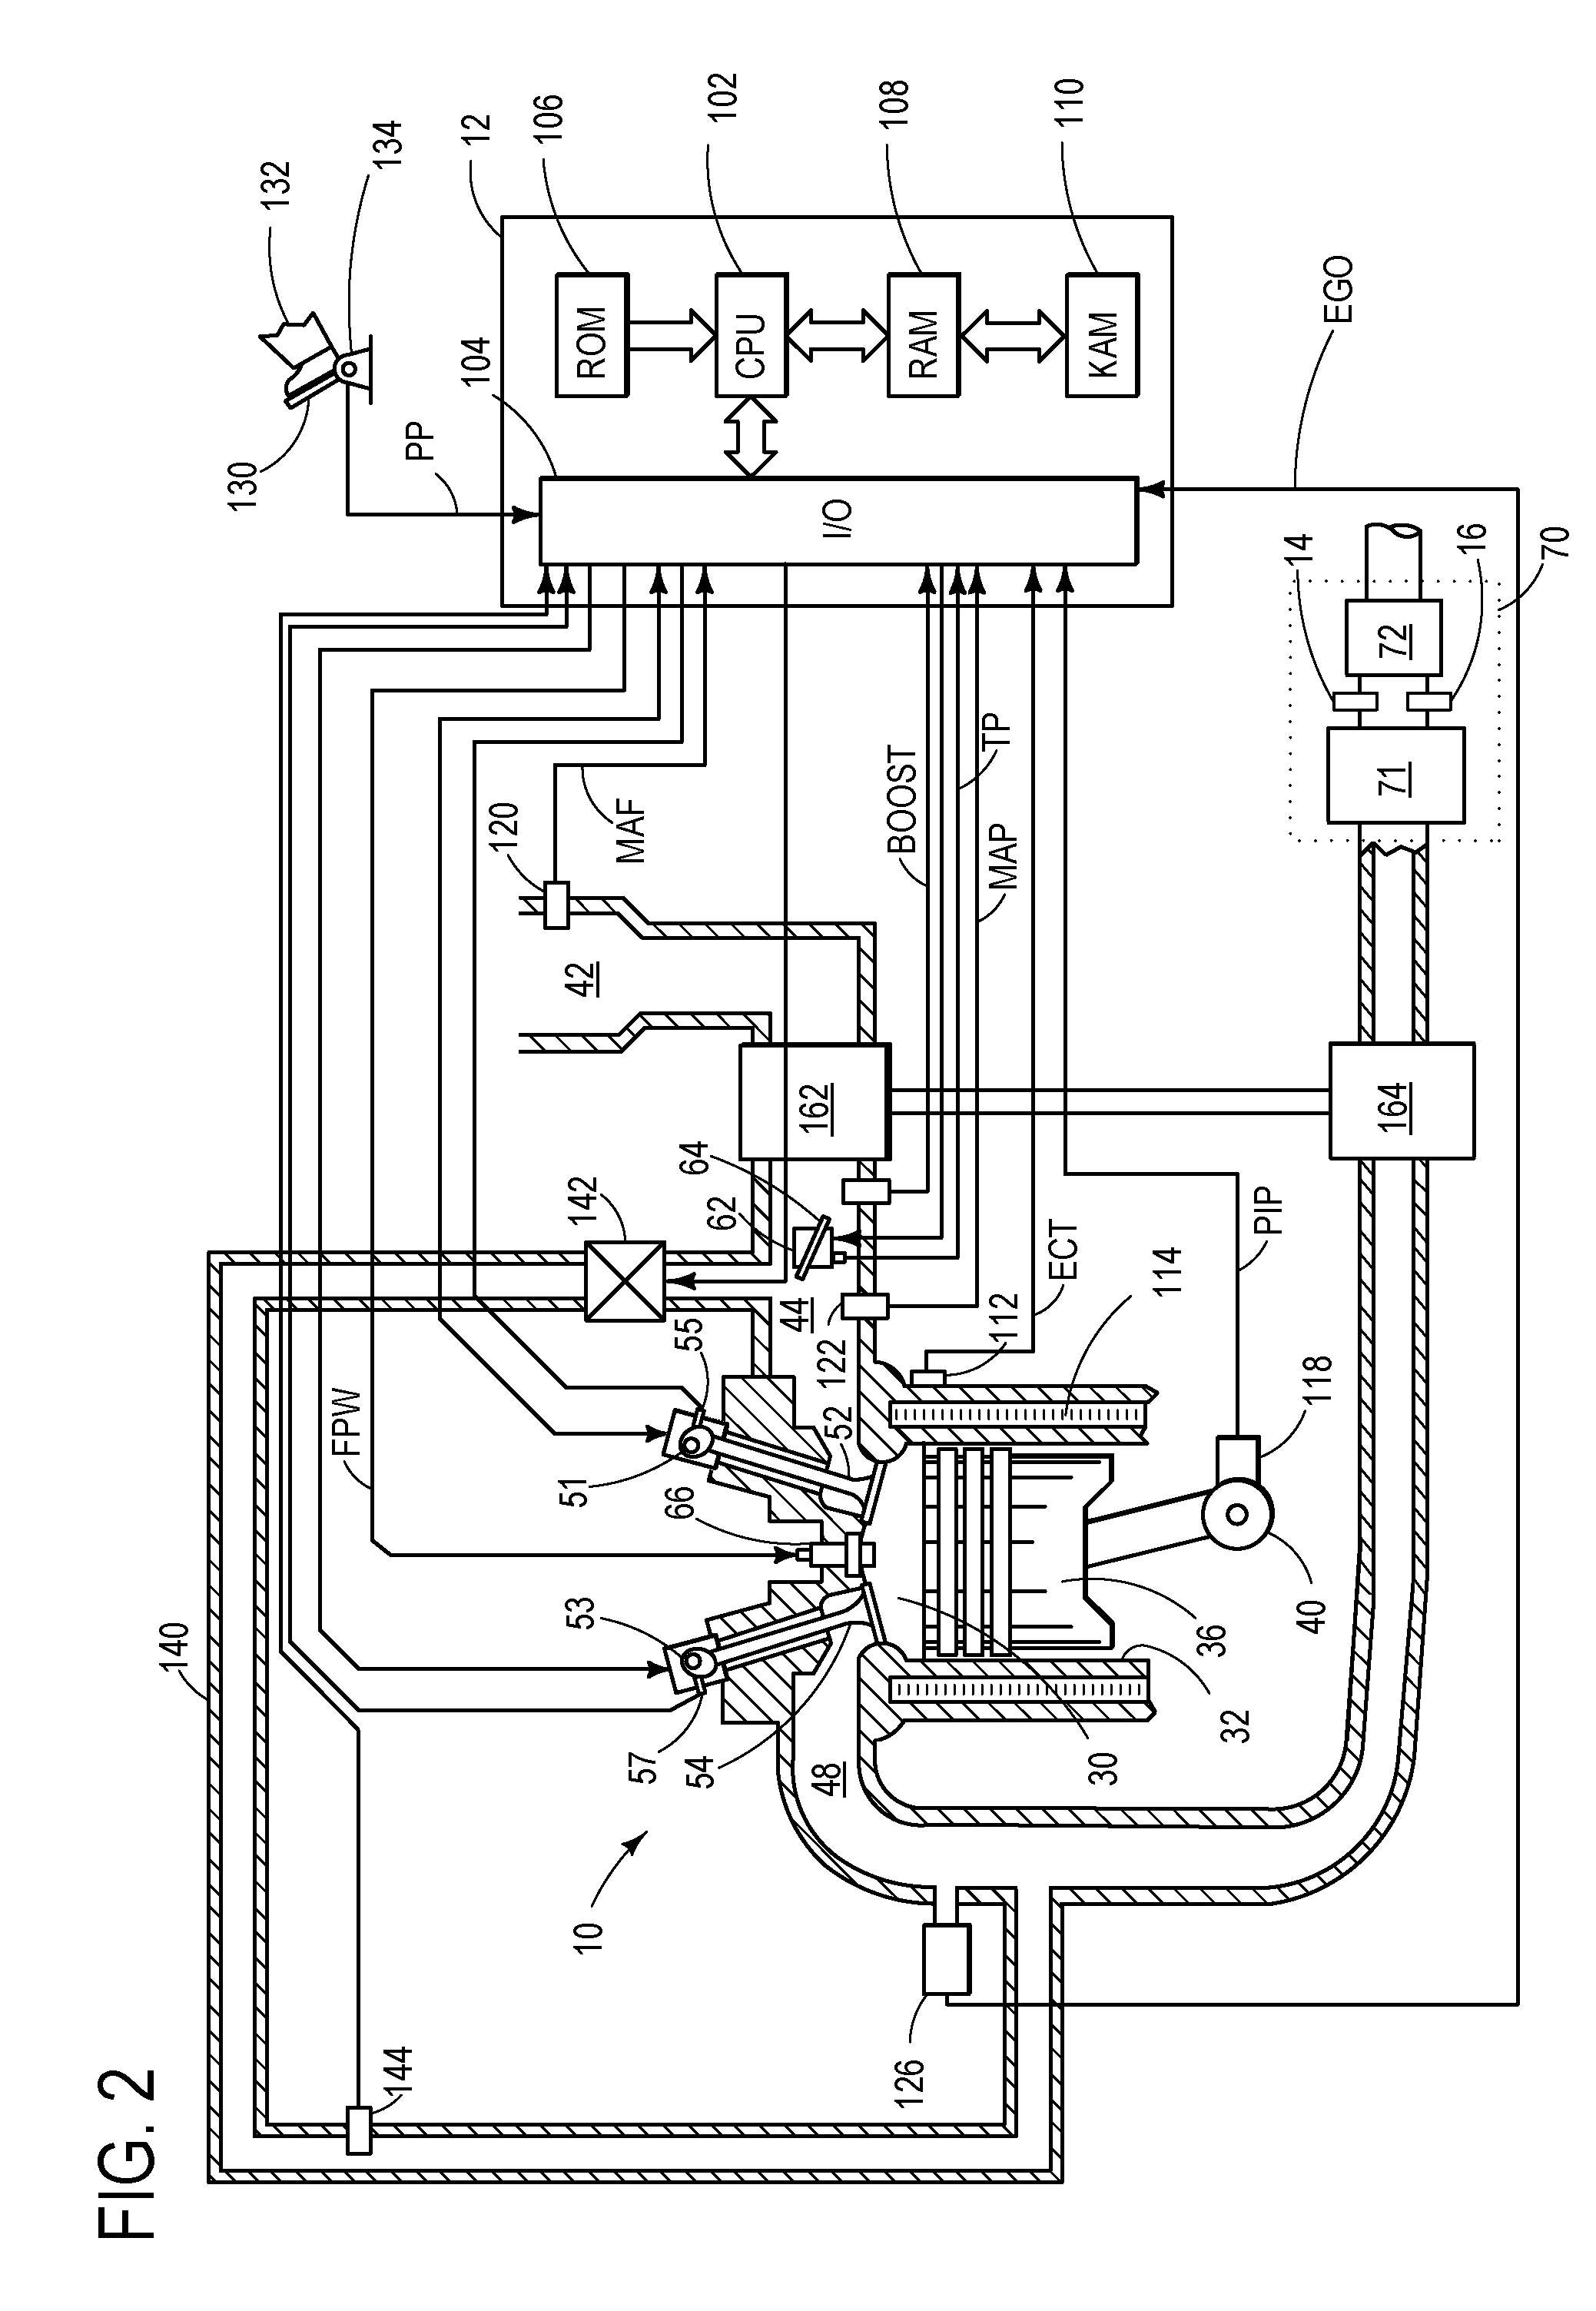 Particulate filter regeneration in an engine